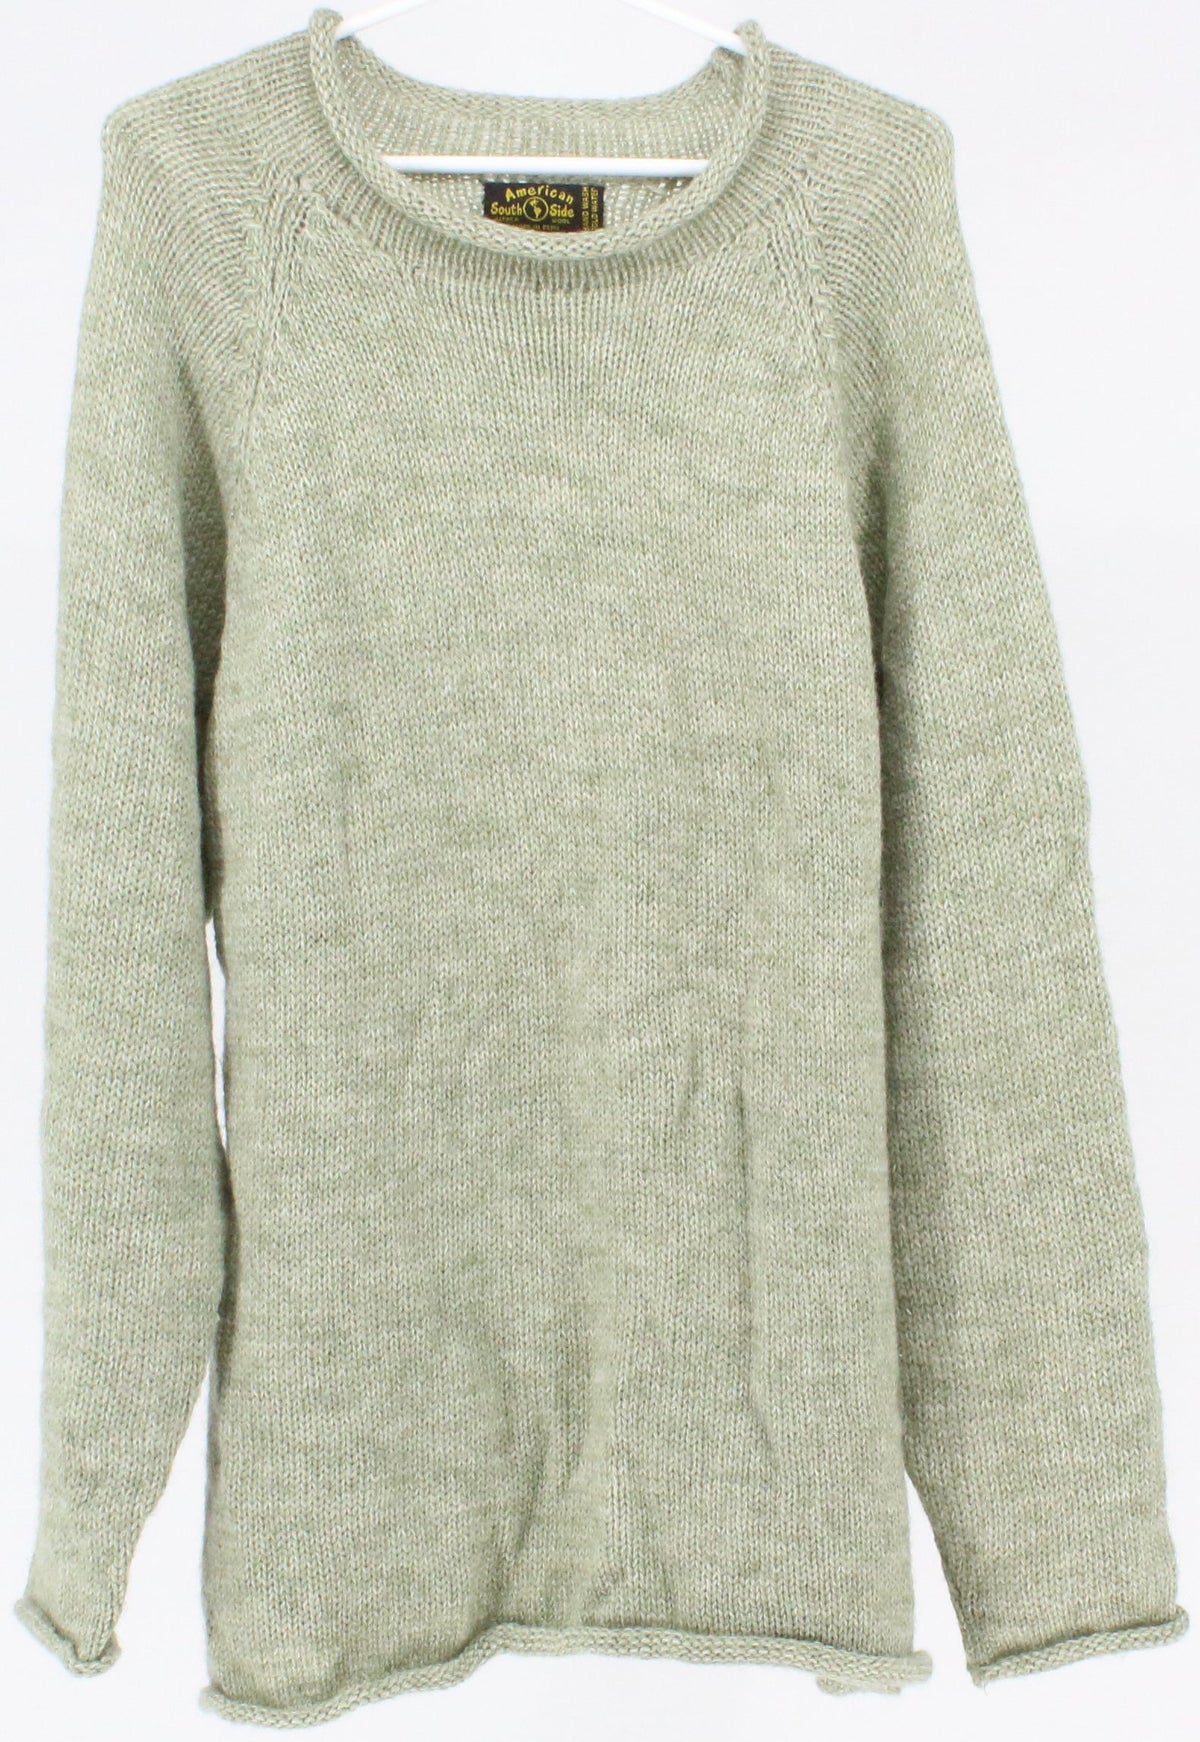 American South Side Light Green Sweater